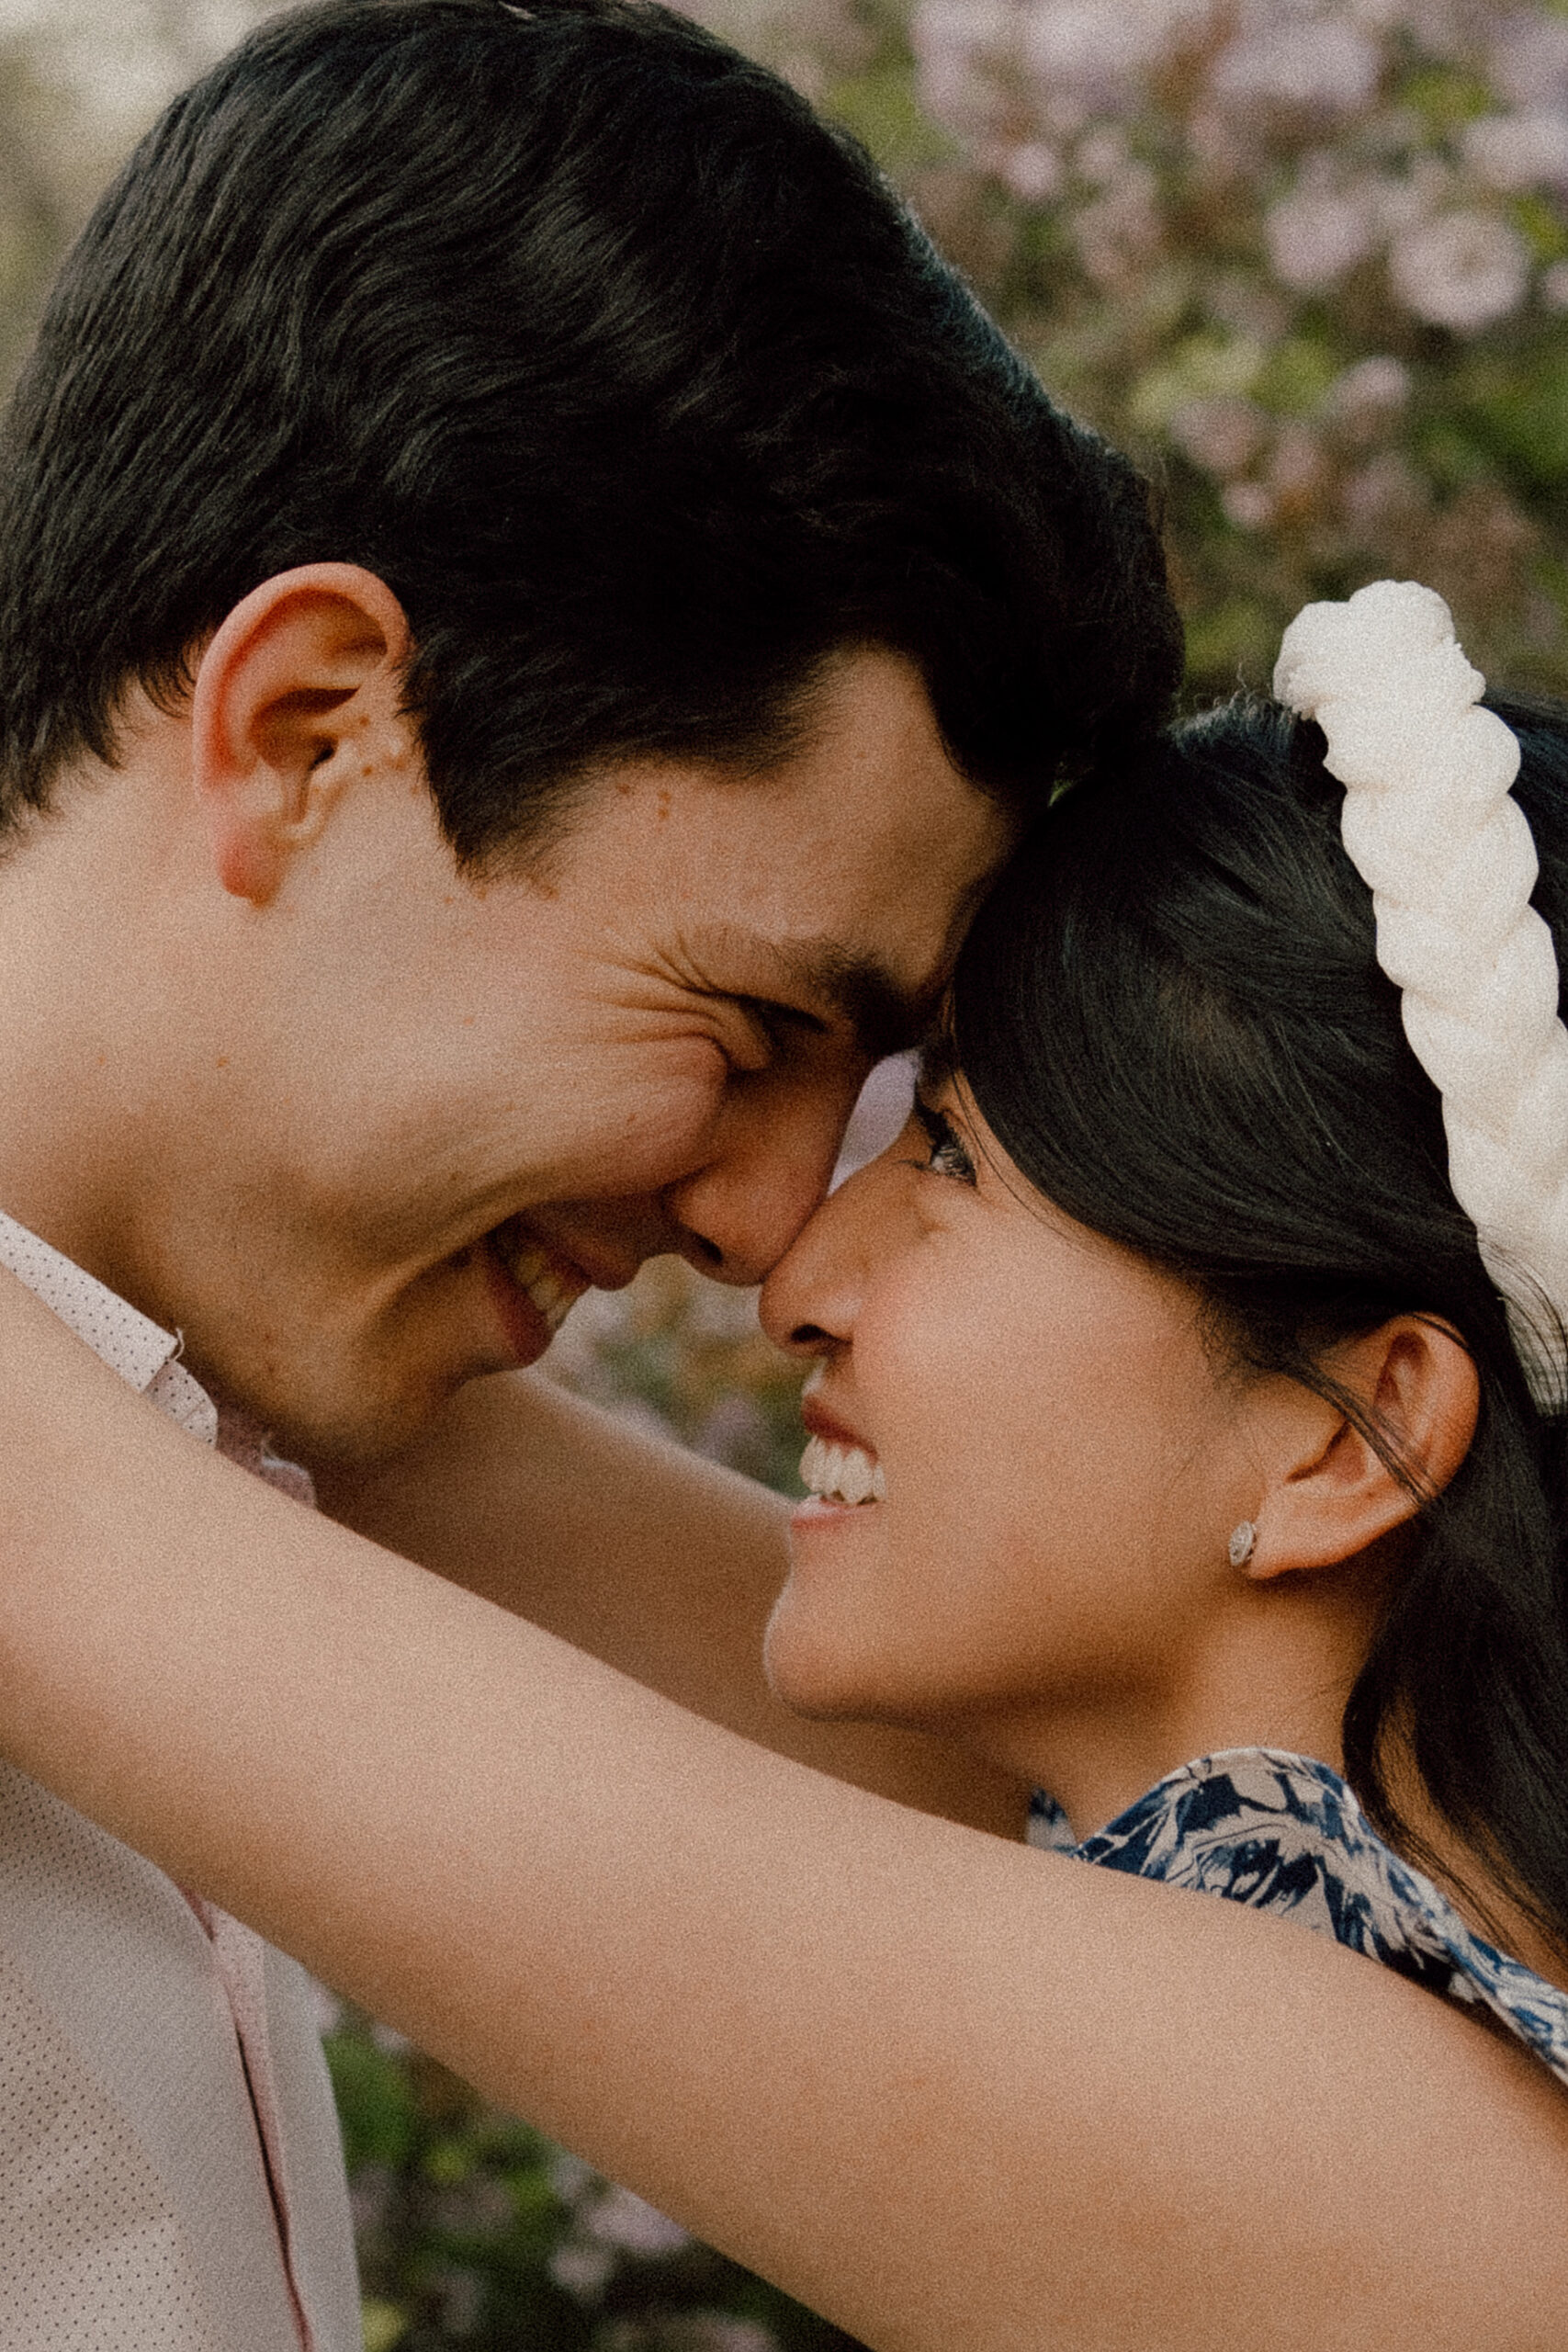 Engaged couple shares an intimate moment, pressing foreheads and gazing into each other's eyes amidst blooming lilac trees during their spring engagement session at the Arnold Arboretum in Boston, MA.